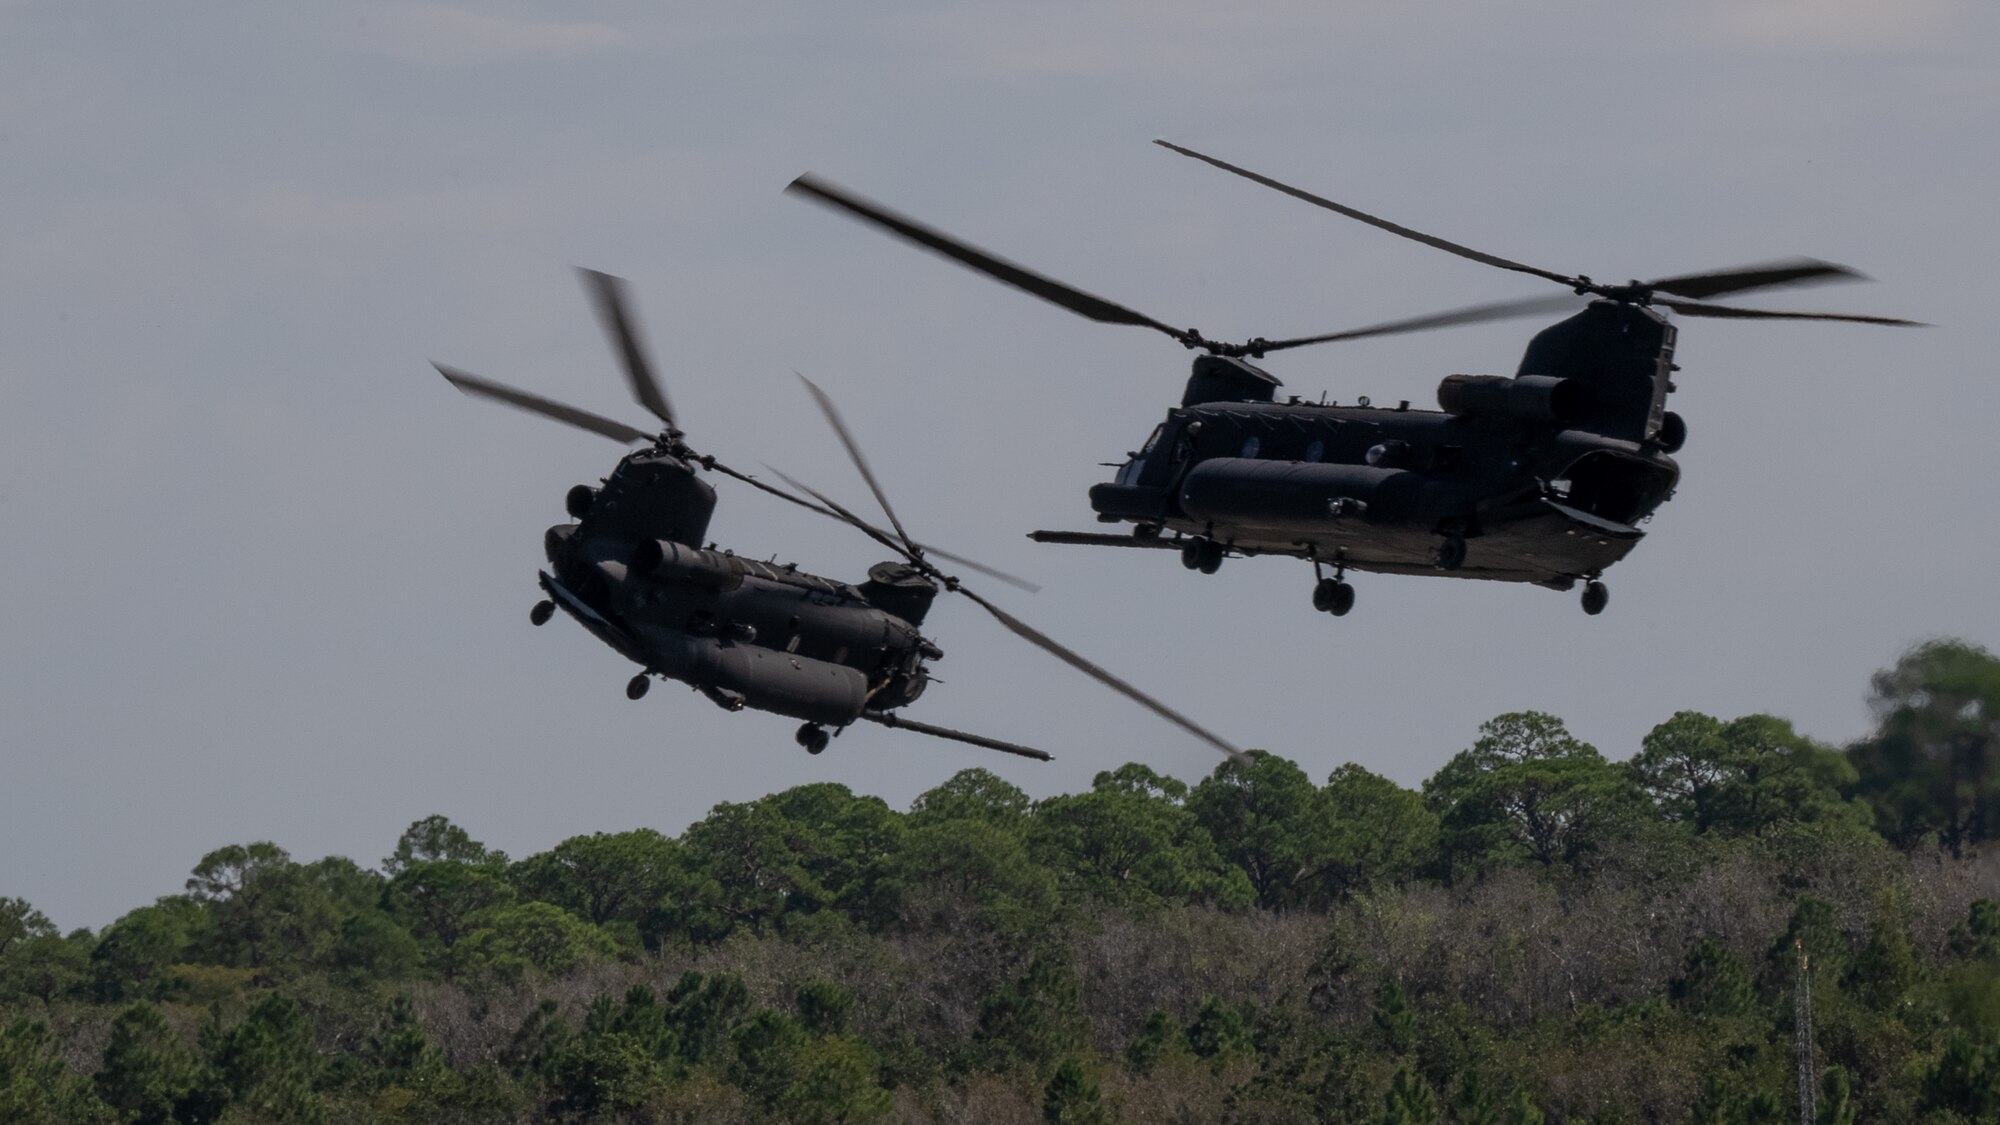 U.S. Army MH-47G Chinook helicopters assigned to the 160th Special Operations Aviation Regiment fly during the 94th Joint Civilian Orientation Conference at Hurlburt Field, Florida, Sept. 21, 2023. JCOC is the Department of Defense’s public liaison program, designed to provide American business and community leaders with a deeper understanding of the military by showcasing the rewards and challenges service members face both on and off the battlefield. (U.S. Air Force photo by Airman 1st Class Hussein Enaya)